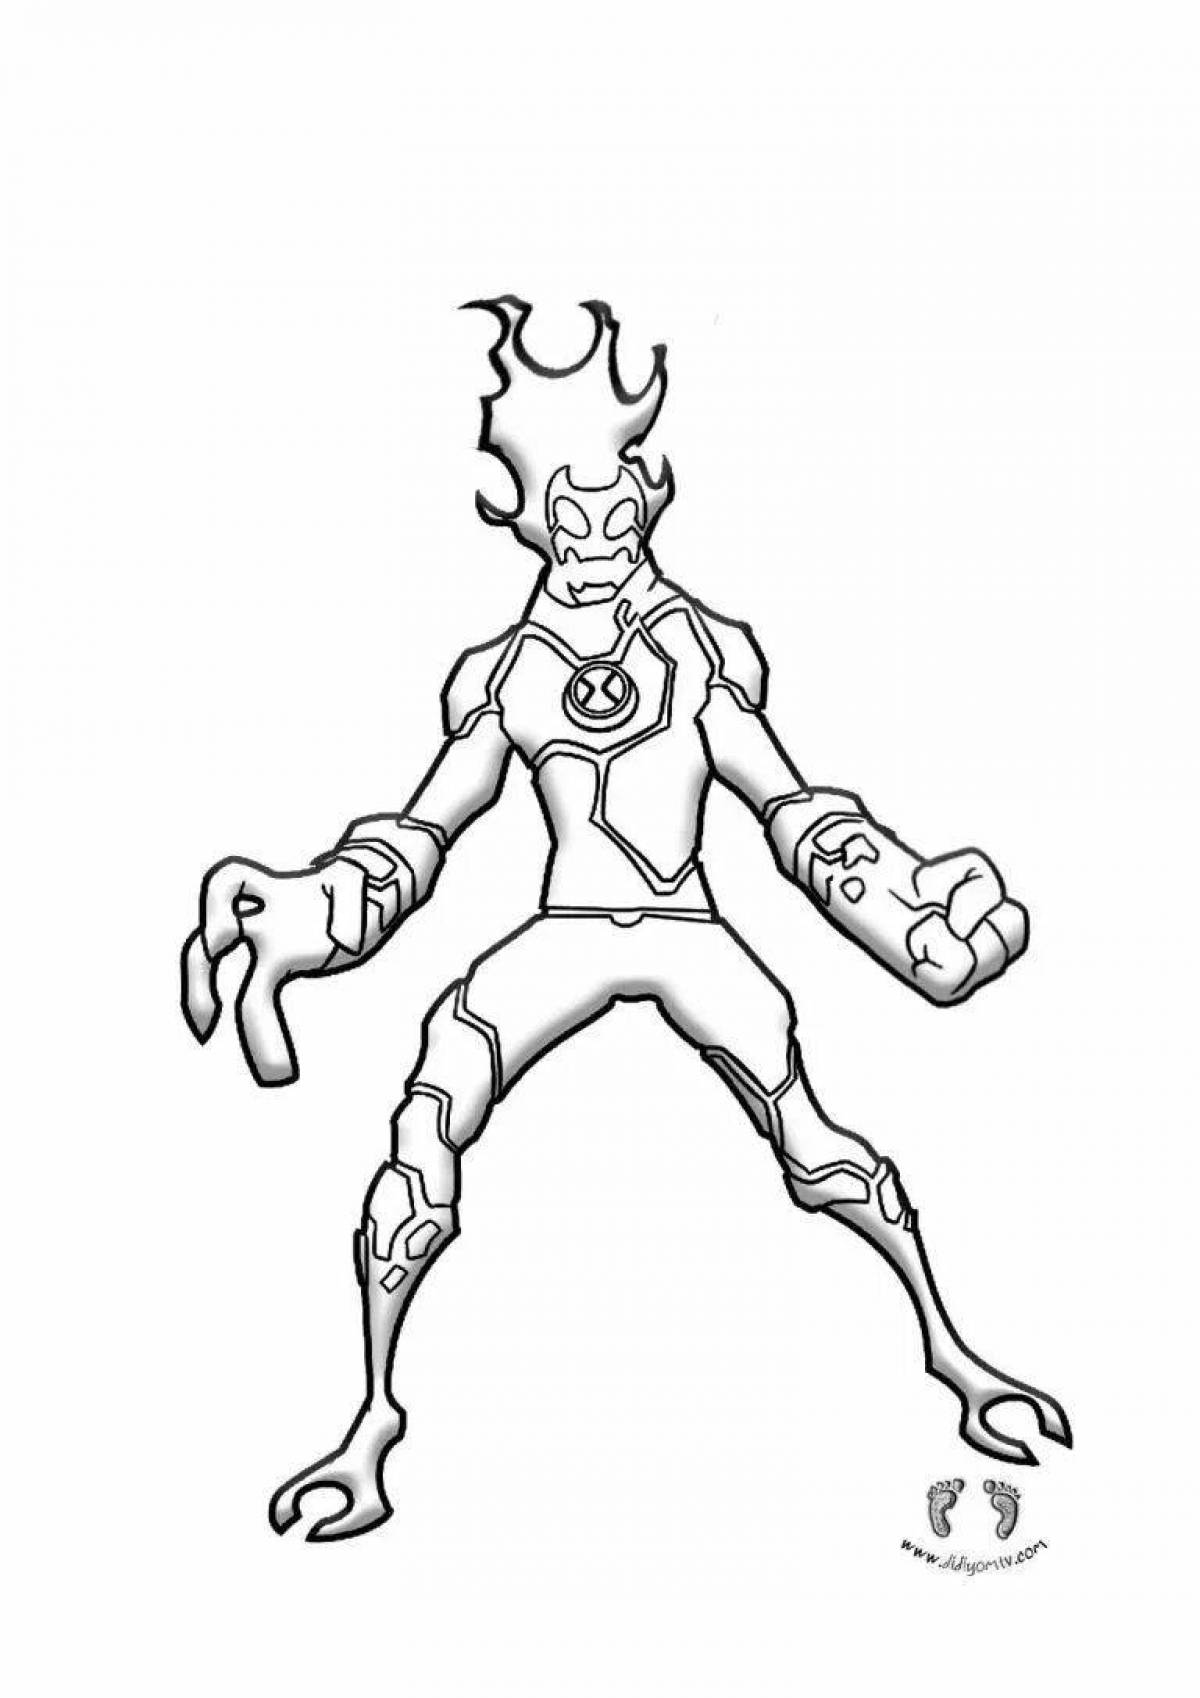 Coloring page flaming fiery man